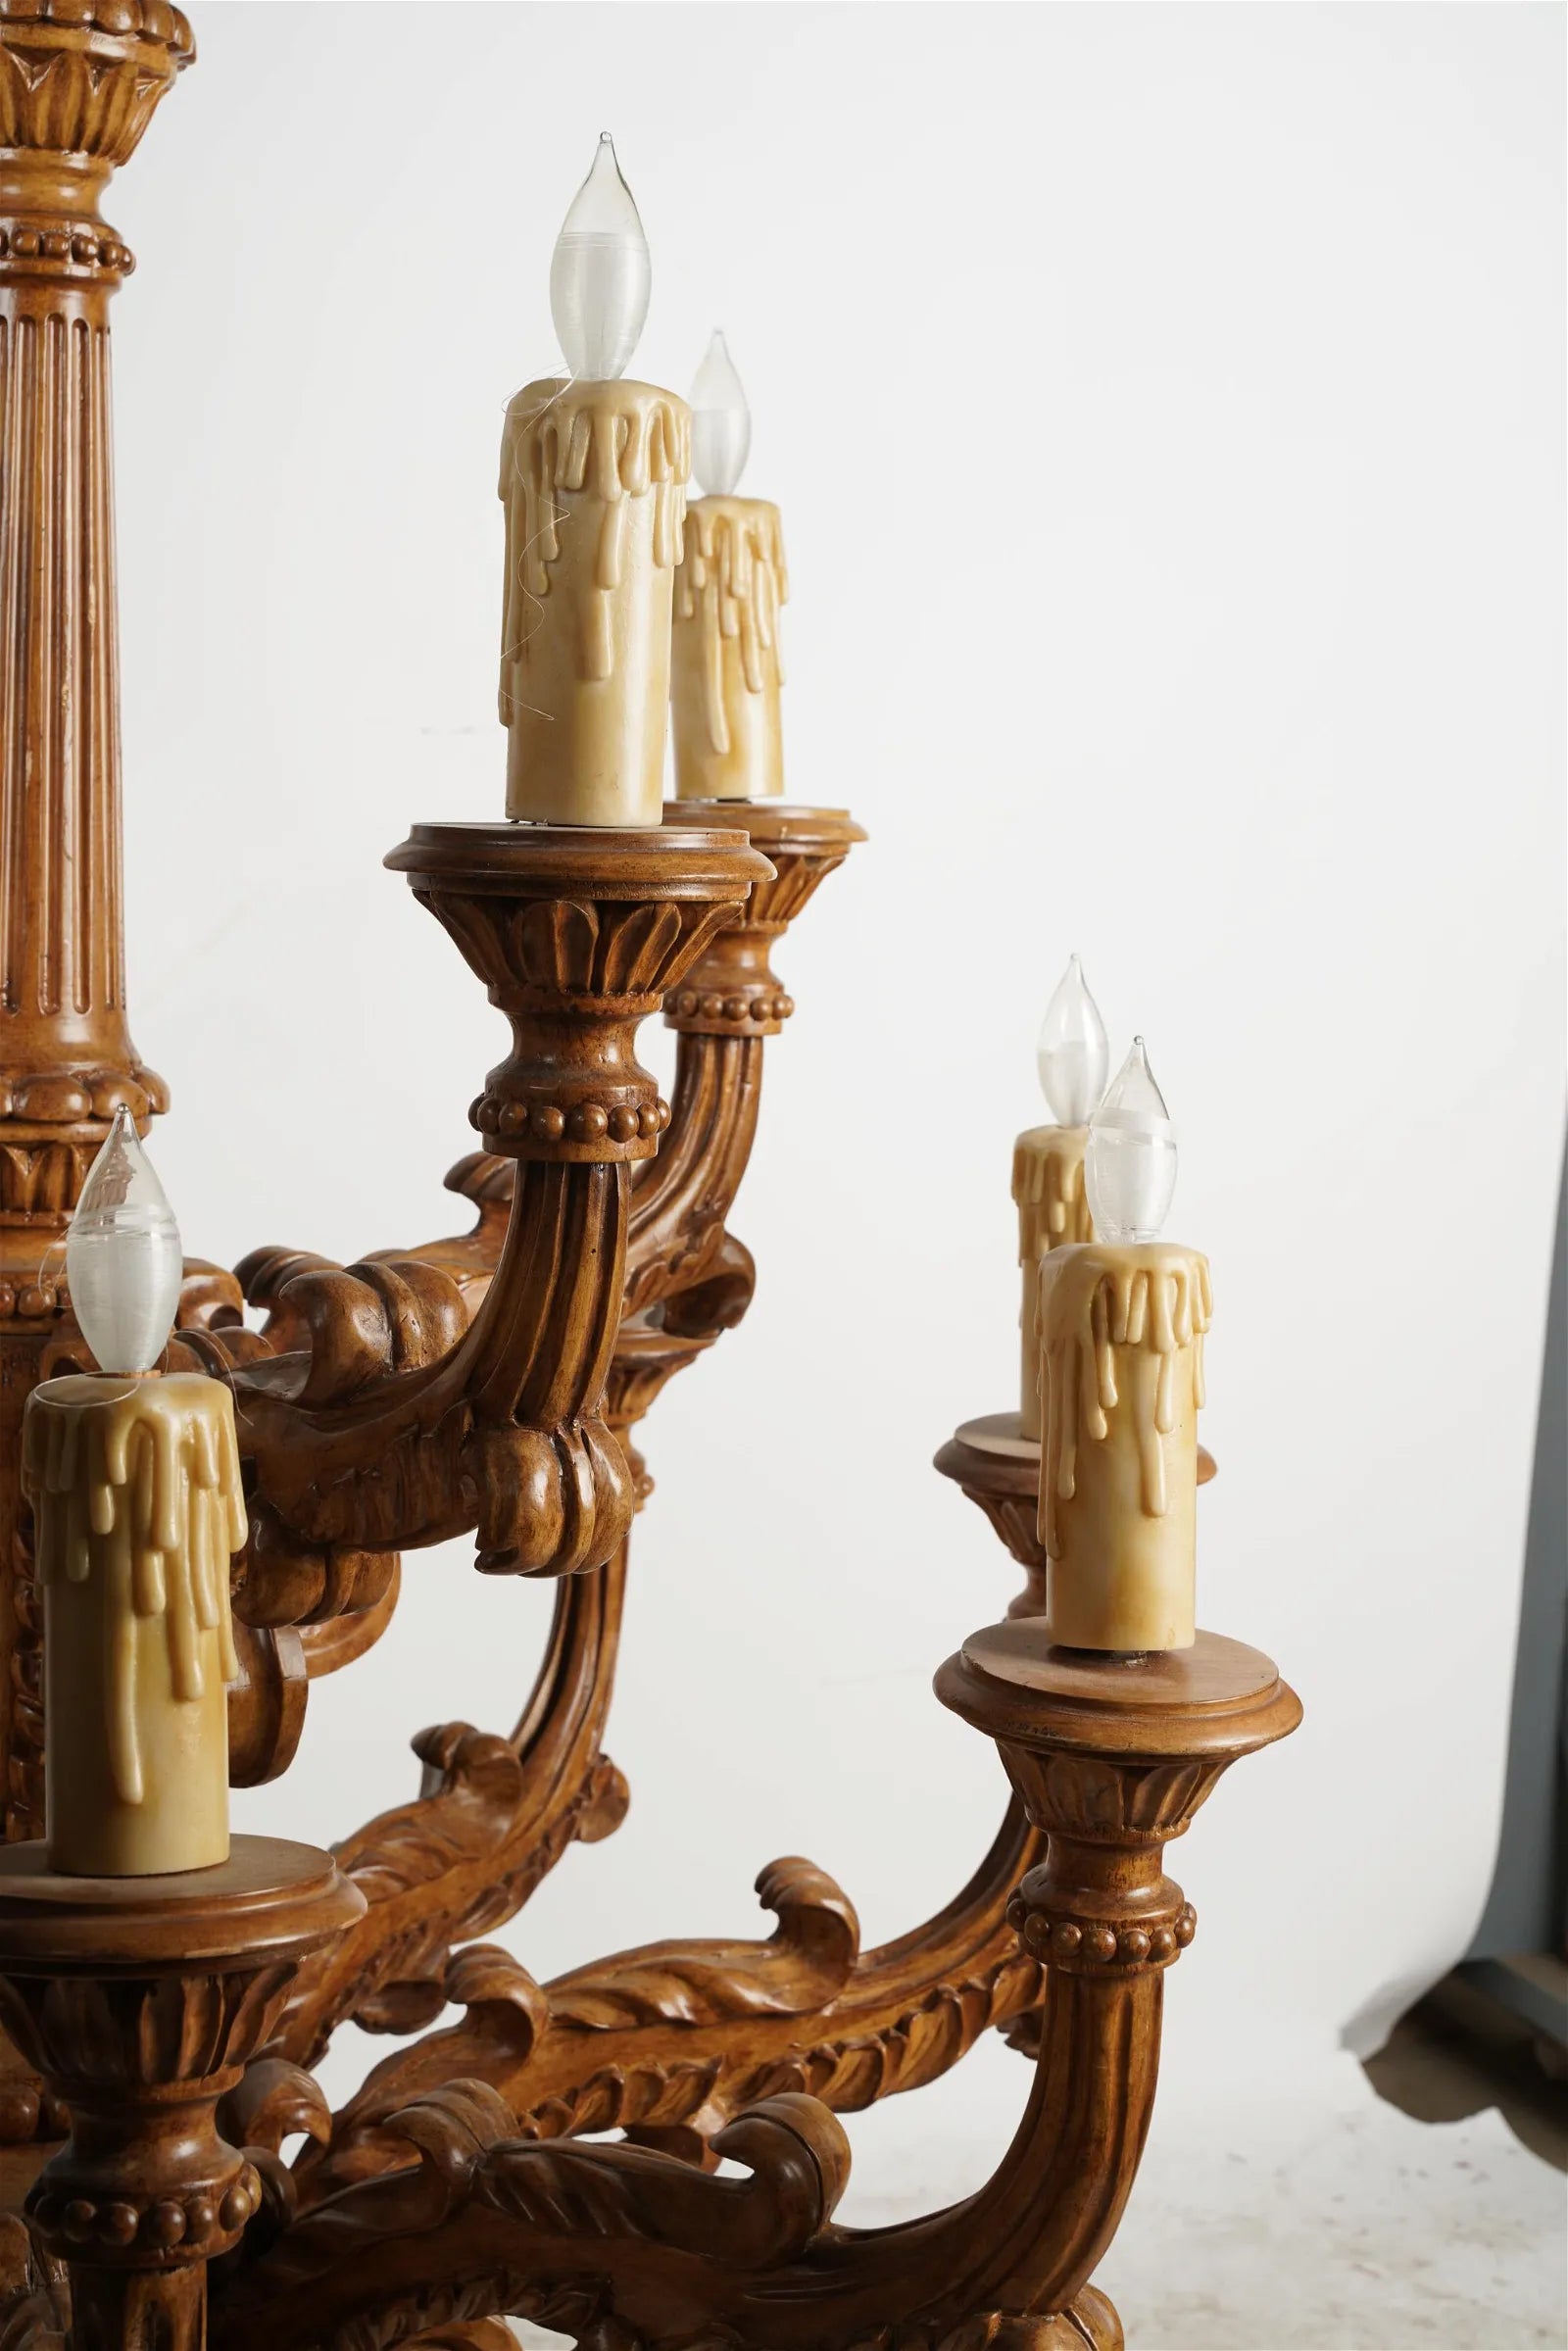 AL1-066:  Late 20th C Carved Wood 12 Light French Provincial Style Chandelier From the Larry Flynt Estate